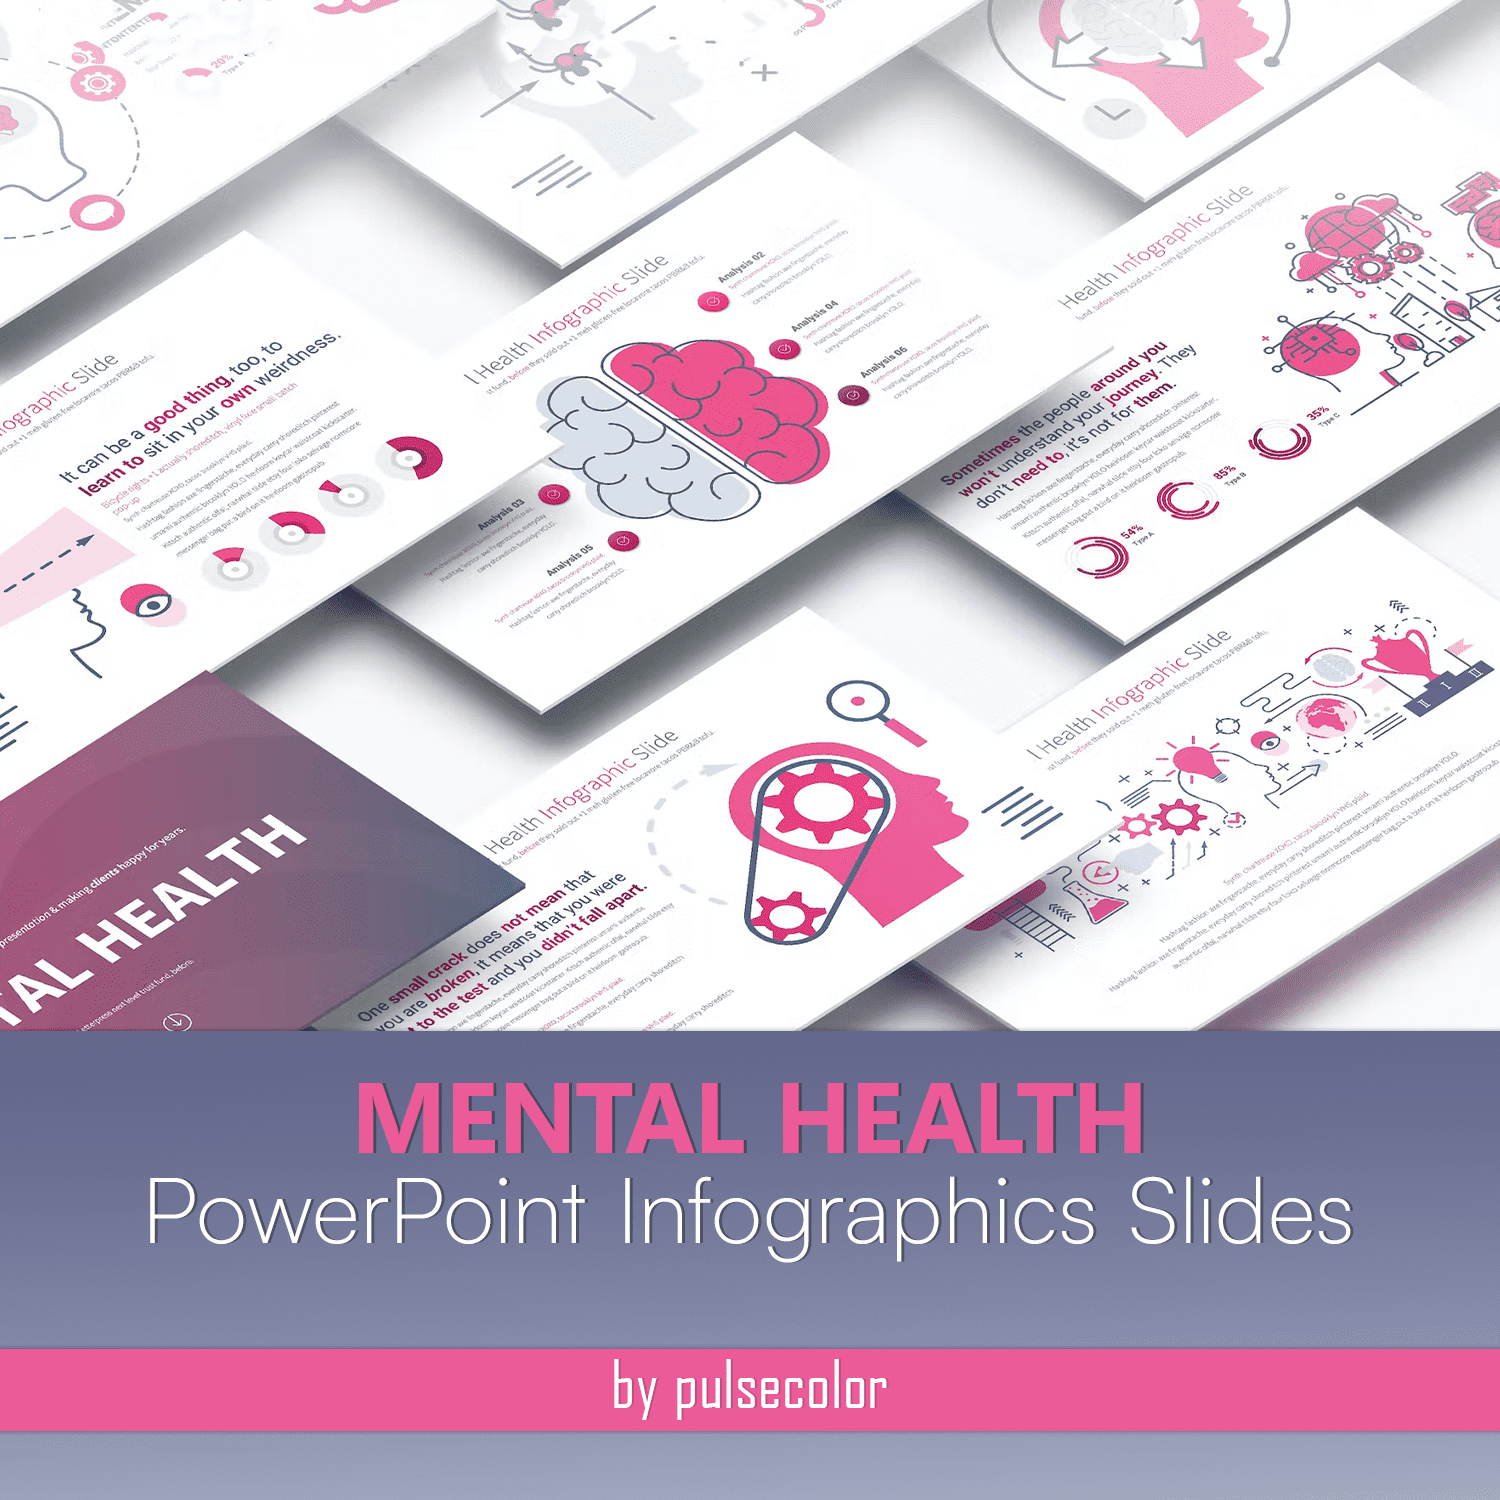 Mental Health - Powerpoint Infographics Slides Cover.